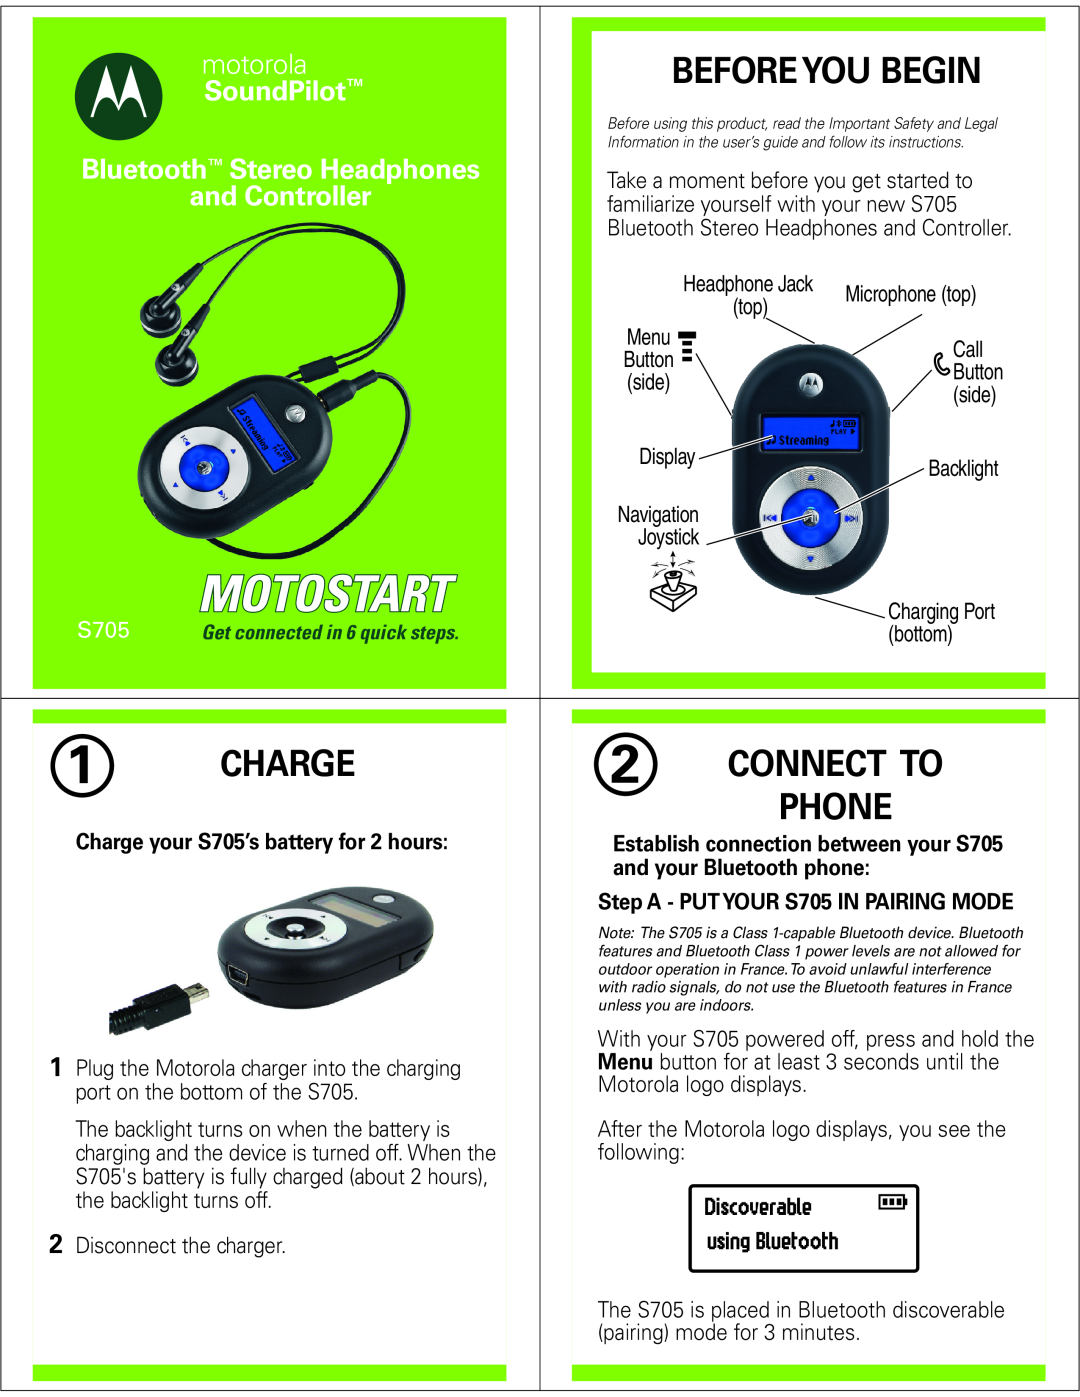 Motorola S705 manual Before You Begin, Charge, Connect To, Phone, motorola, SoundPilot, Bluetooth Stereo Headphones 